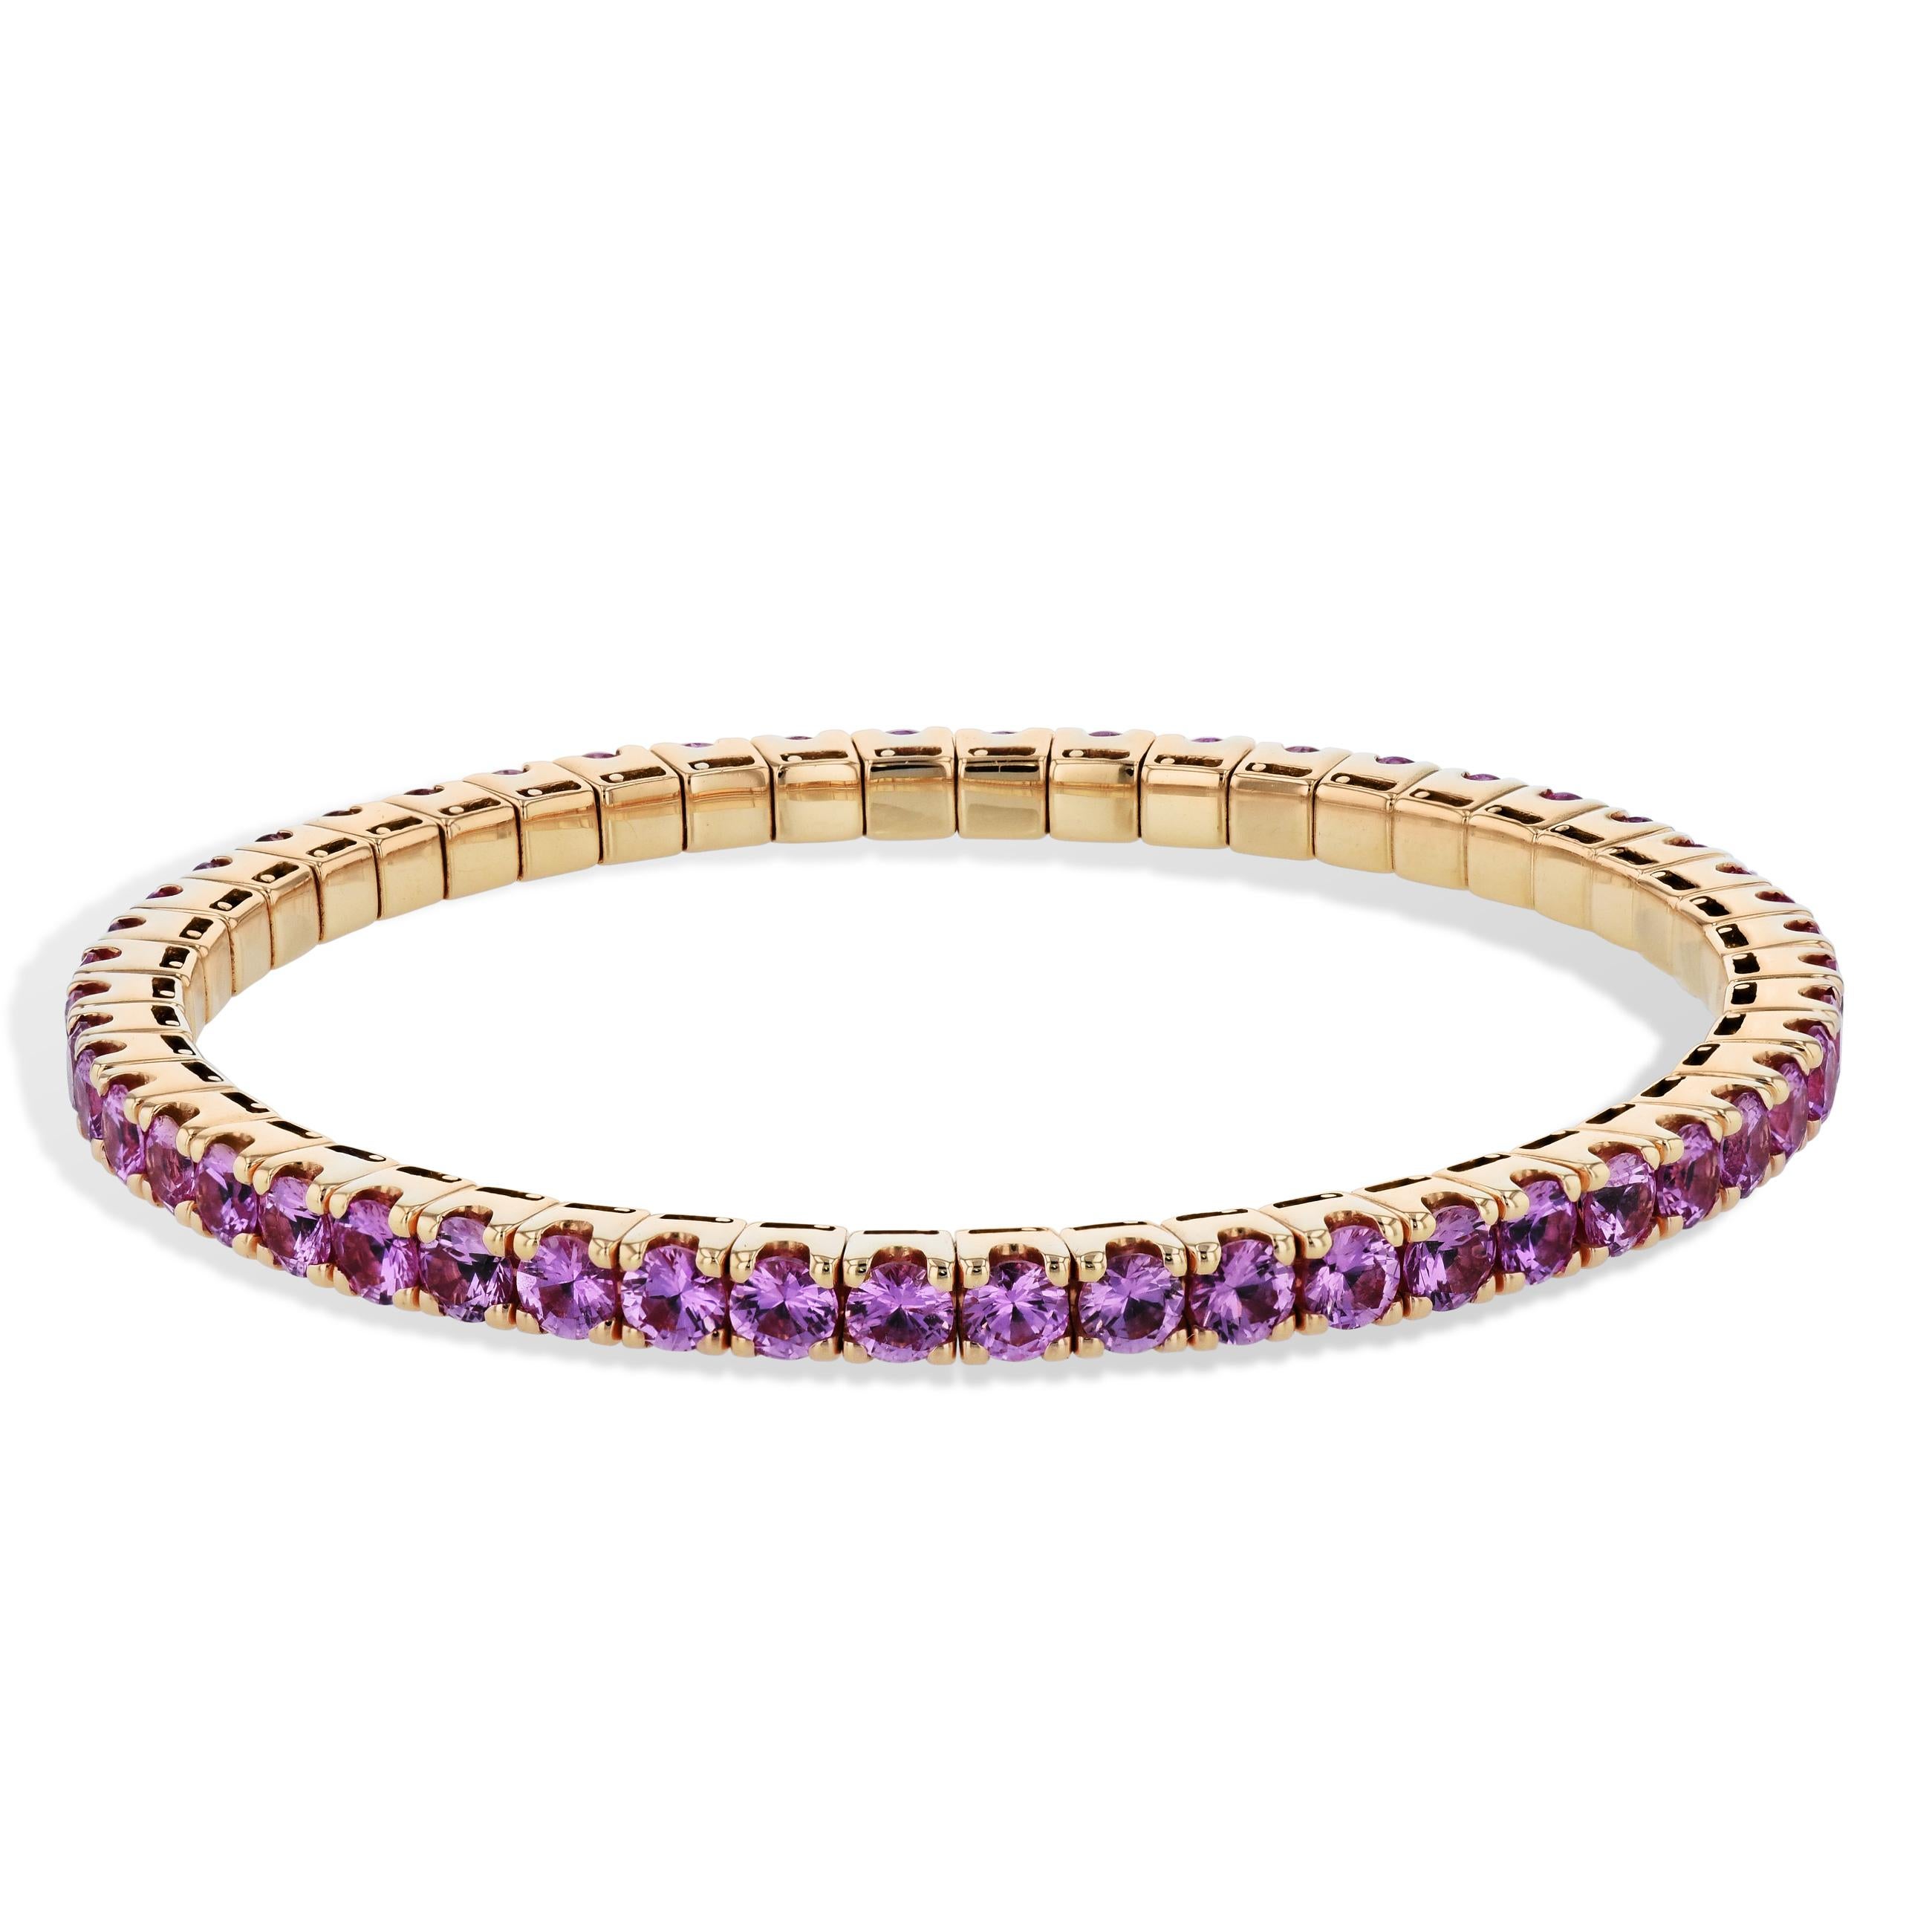 This breathtaking pink sapphire, rose gold, stretch tennis bracelet is a true treasure. 
It boasts 9.83 carats of exquisite pink sapphires set in luxurious 18 karat rose gold. 

Its unique stretch design makes it so easy to wear and gives you the